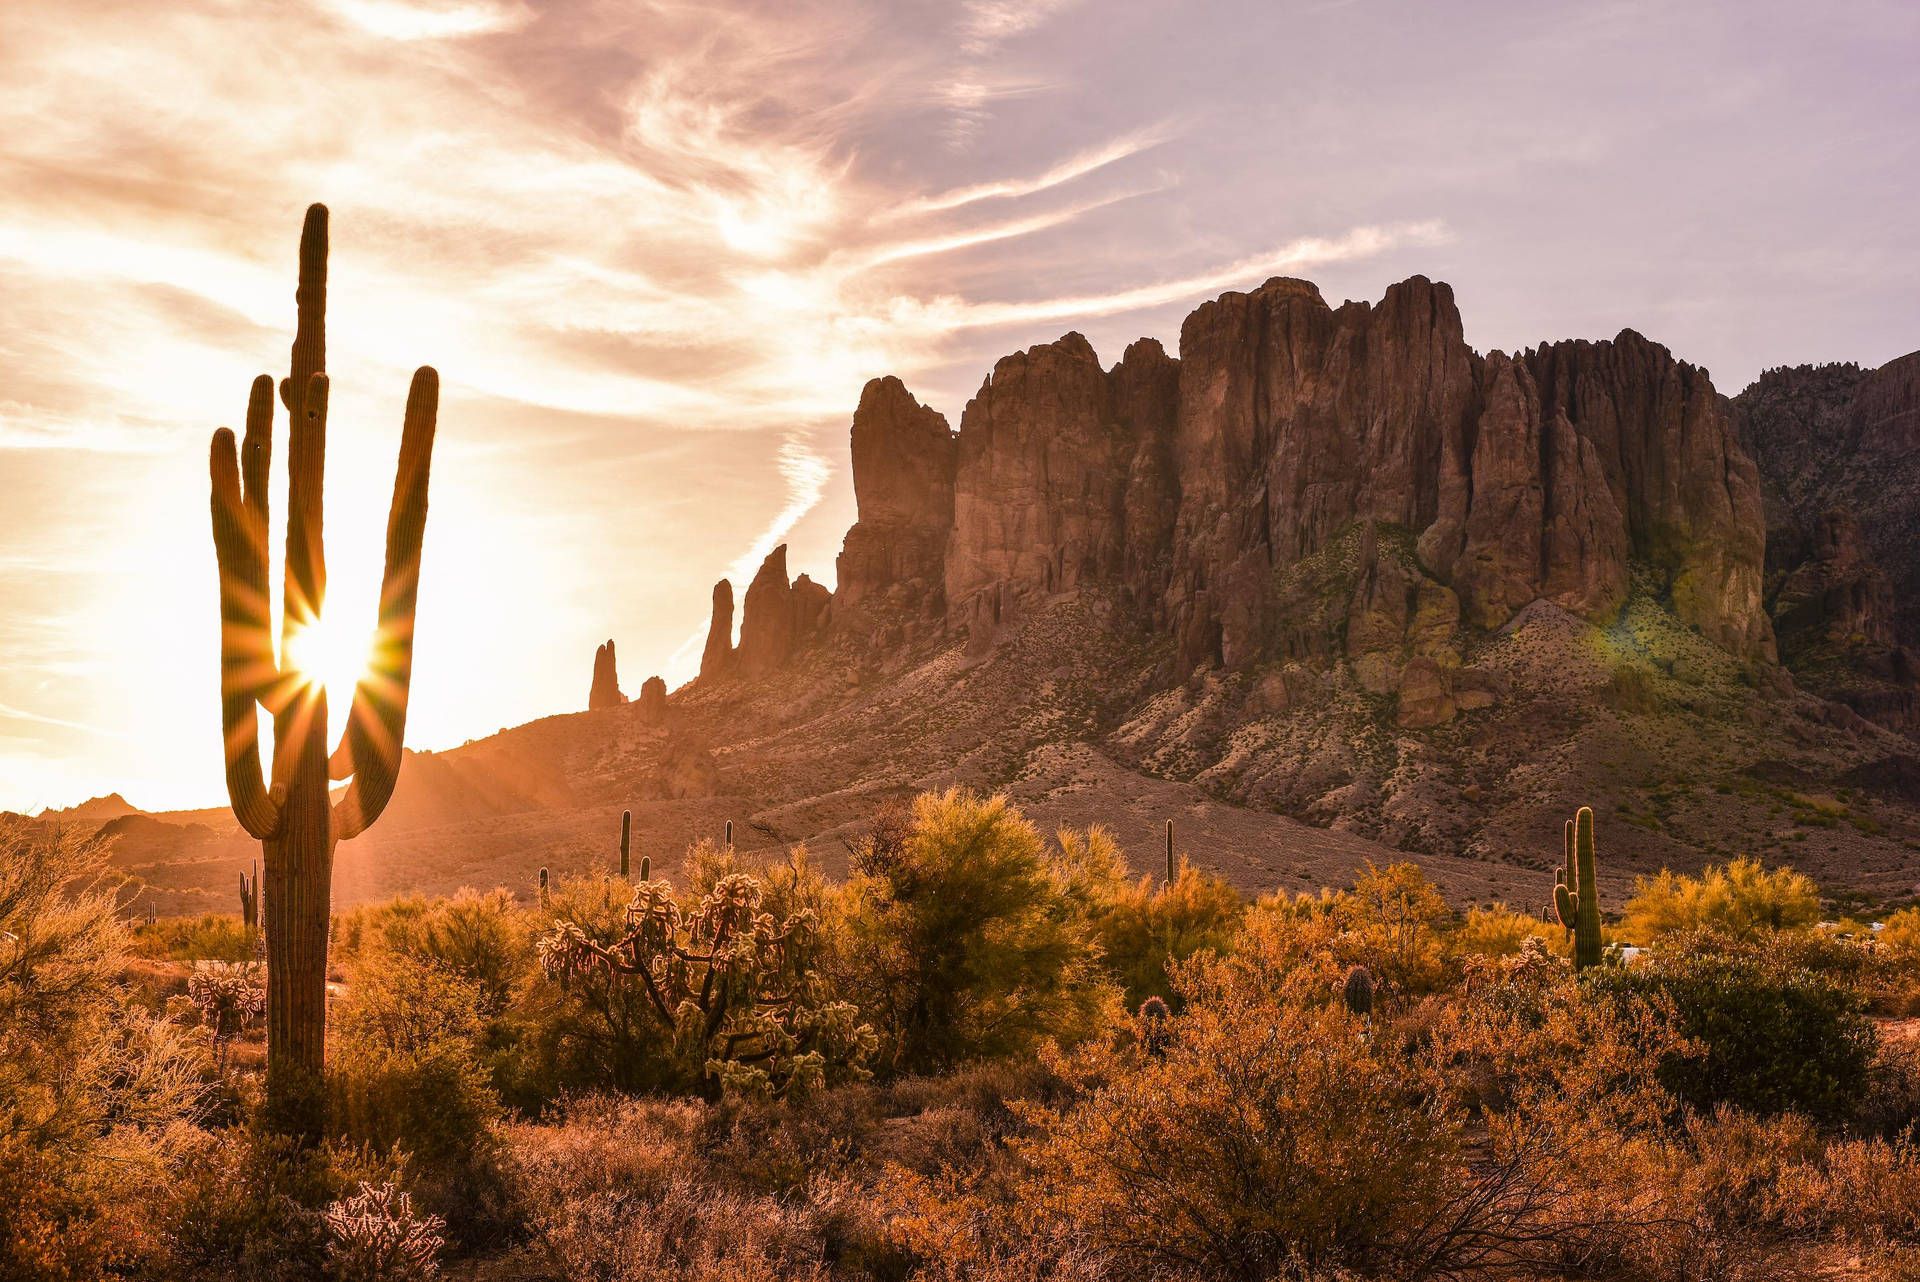 The sun setting behind the Superstition Mountains in Arizona. - Desert